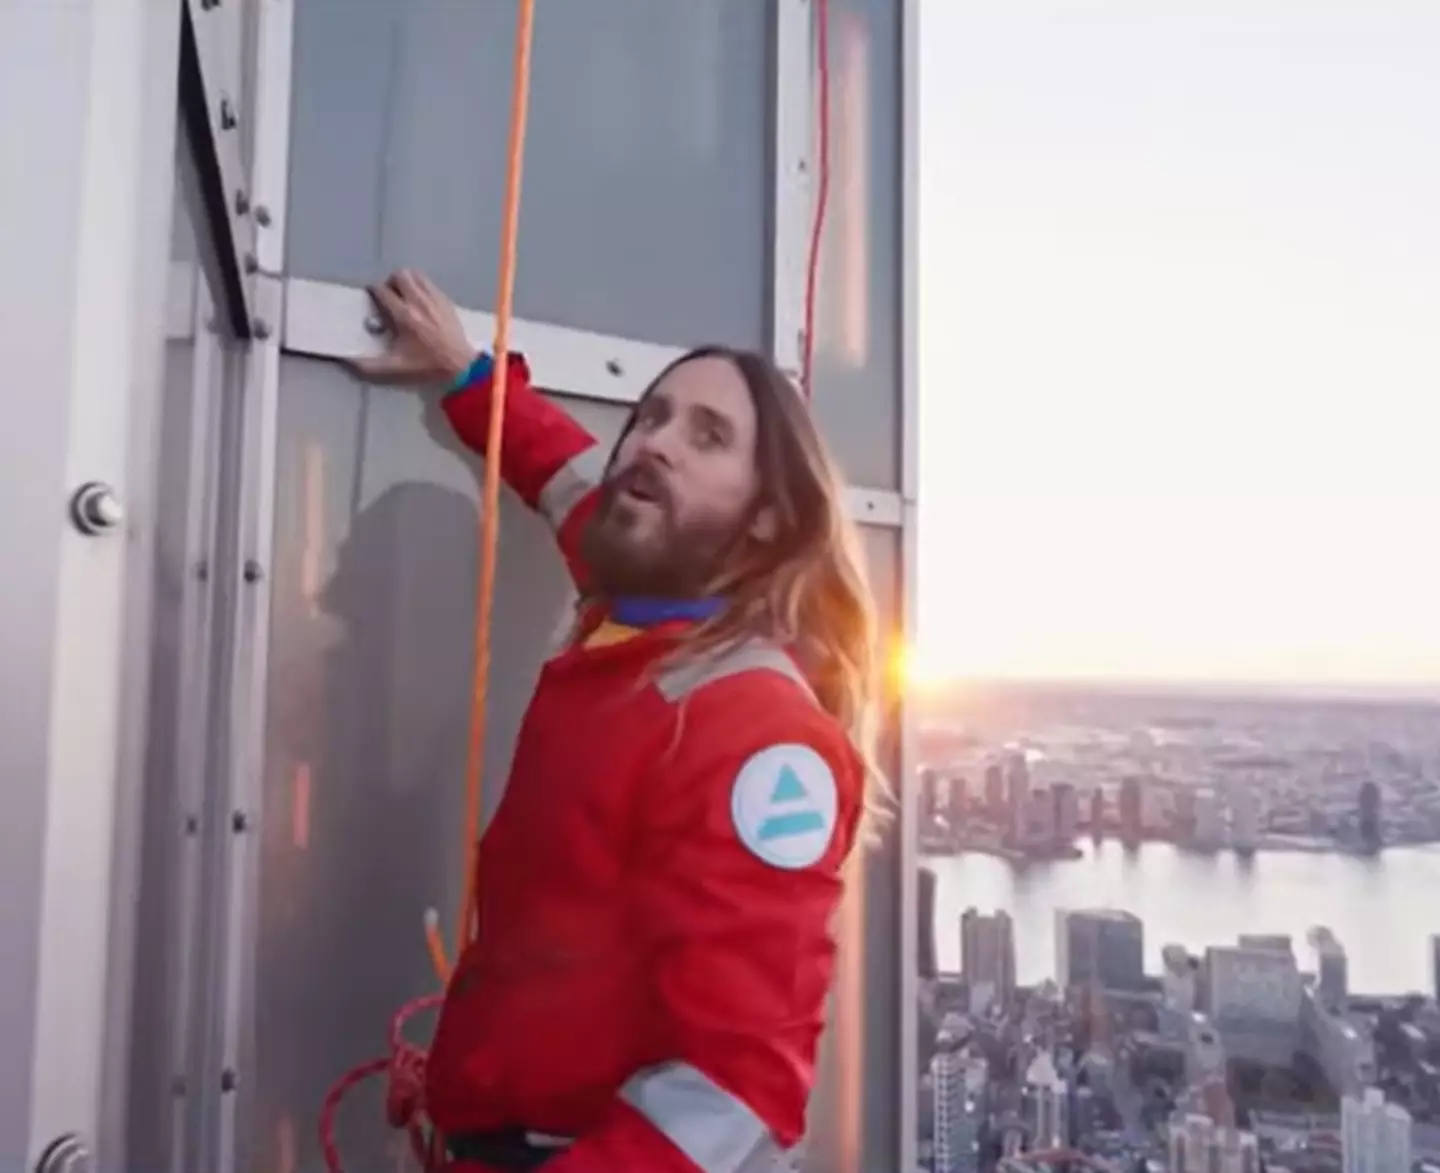 That's pretty high up, Jared.